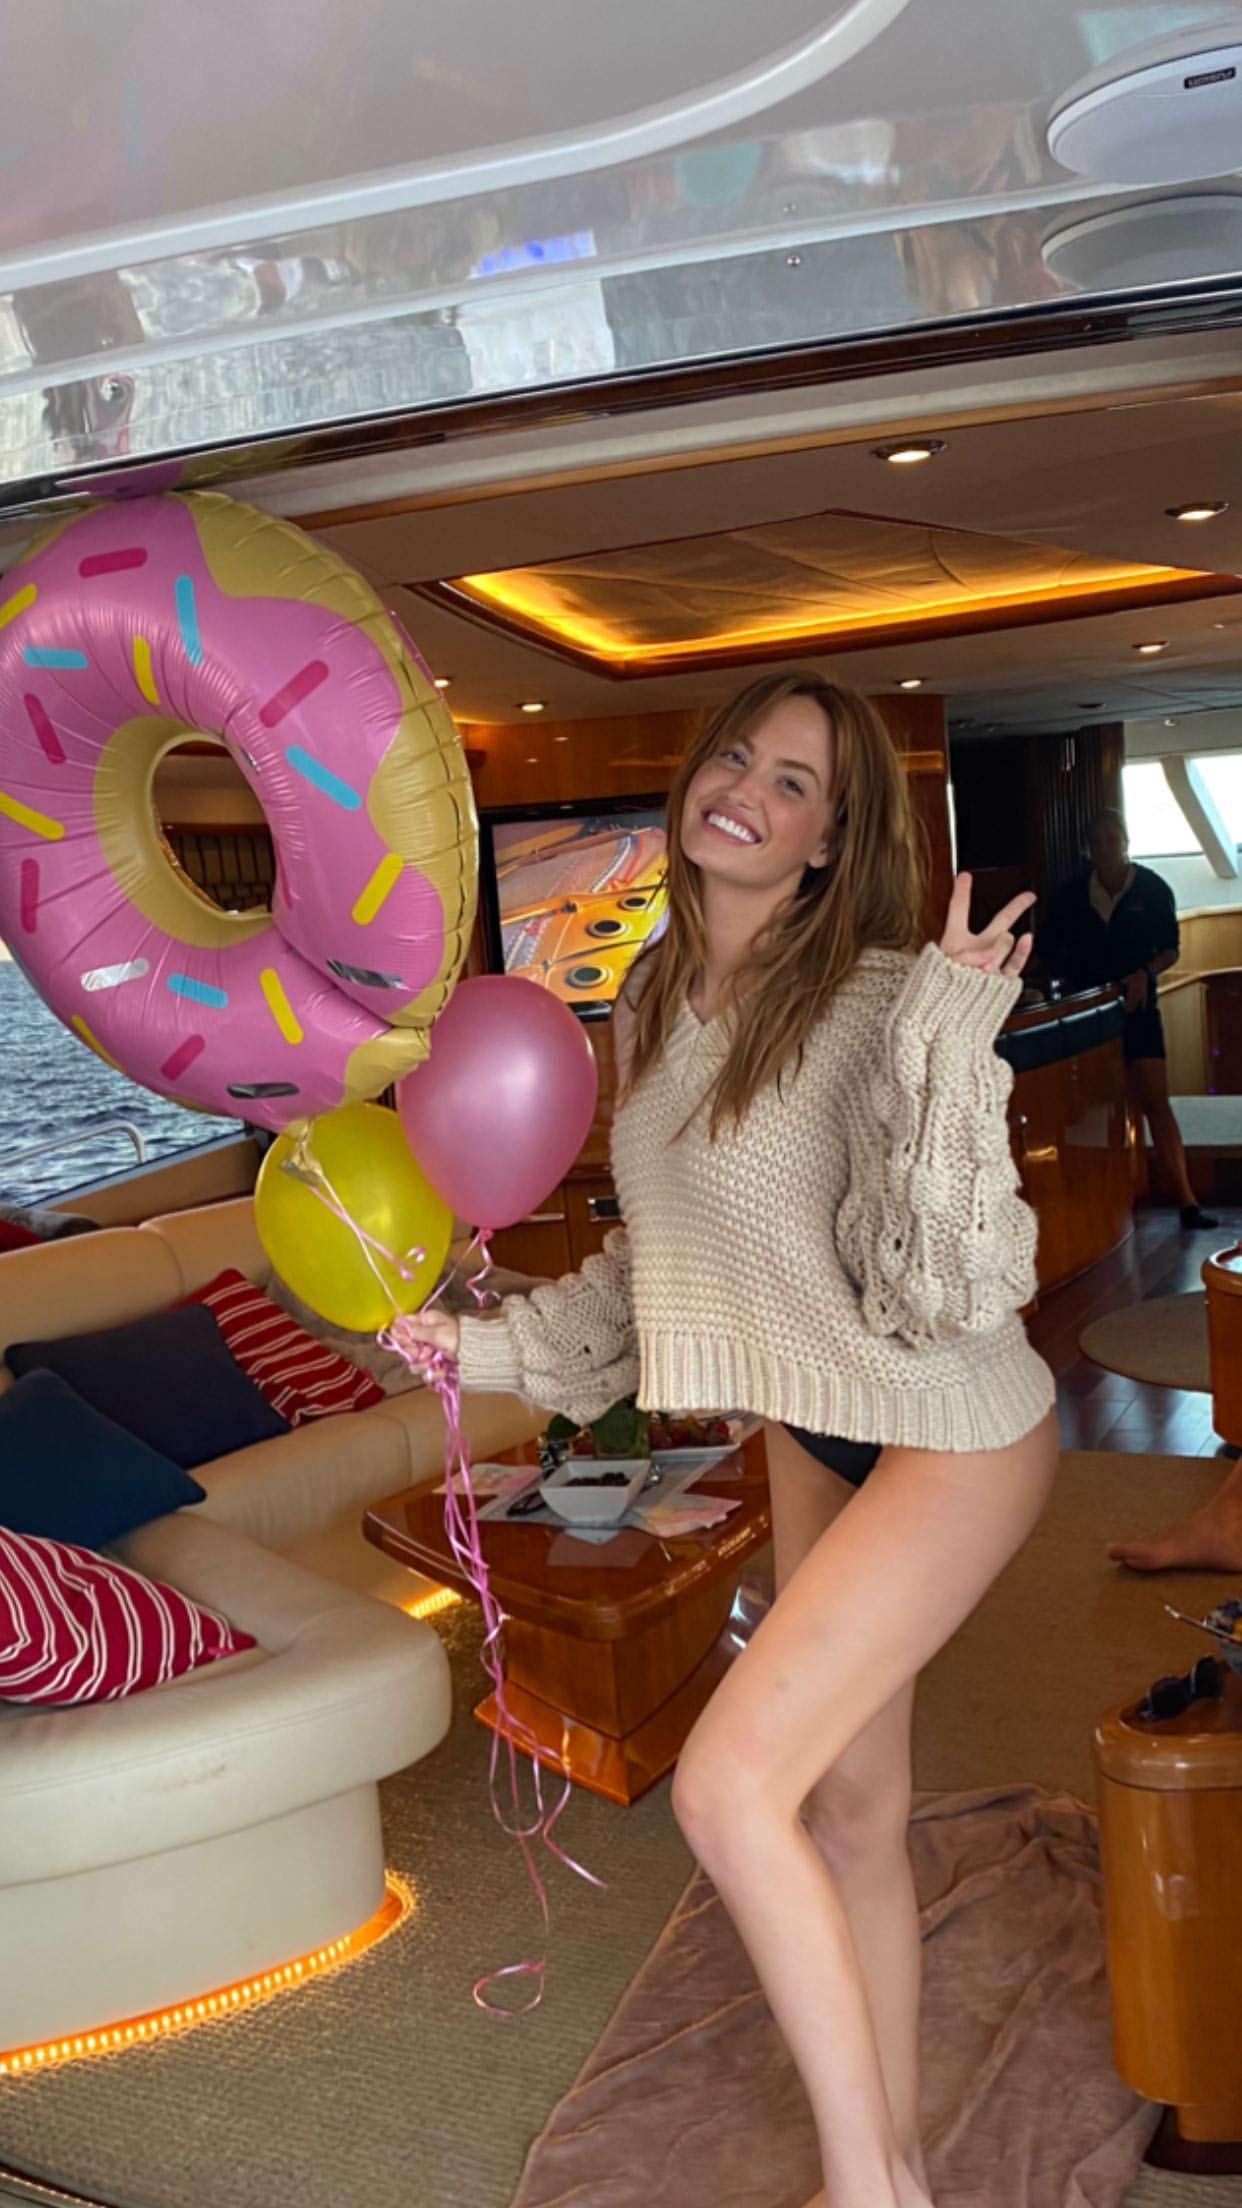 Haley Kalil Puts on a Boat Show! - Photo 8